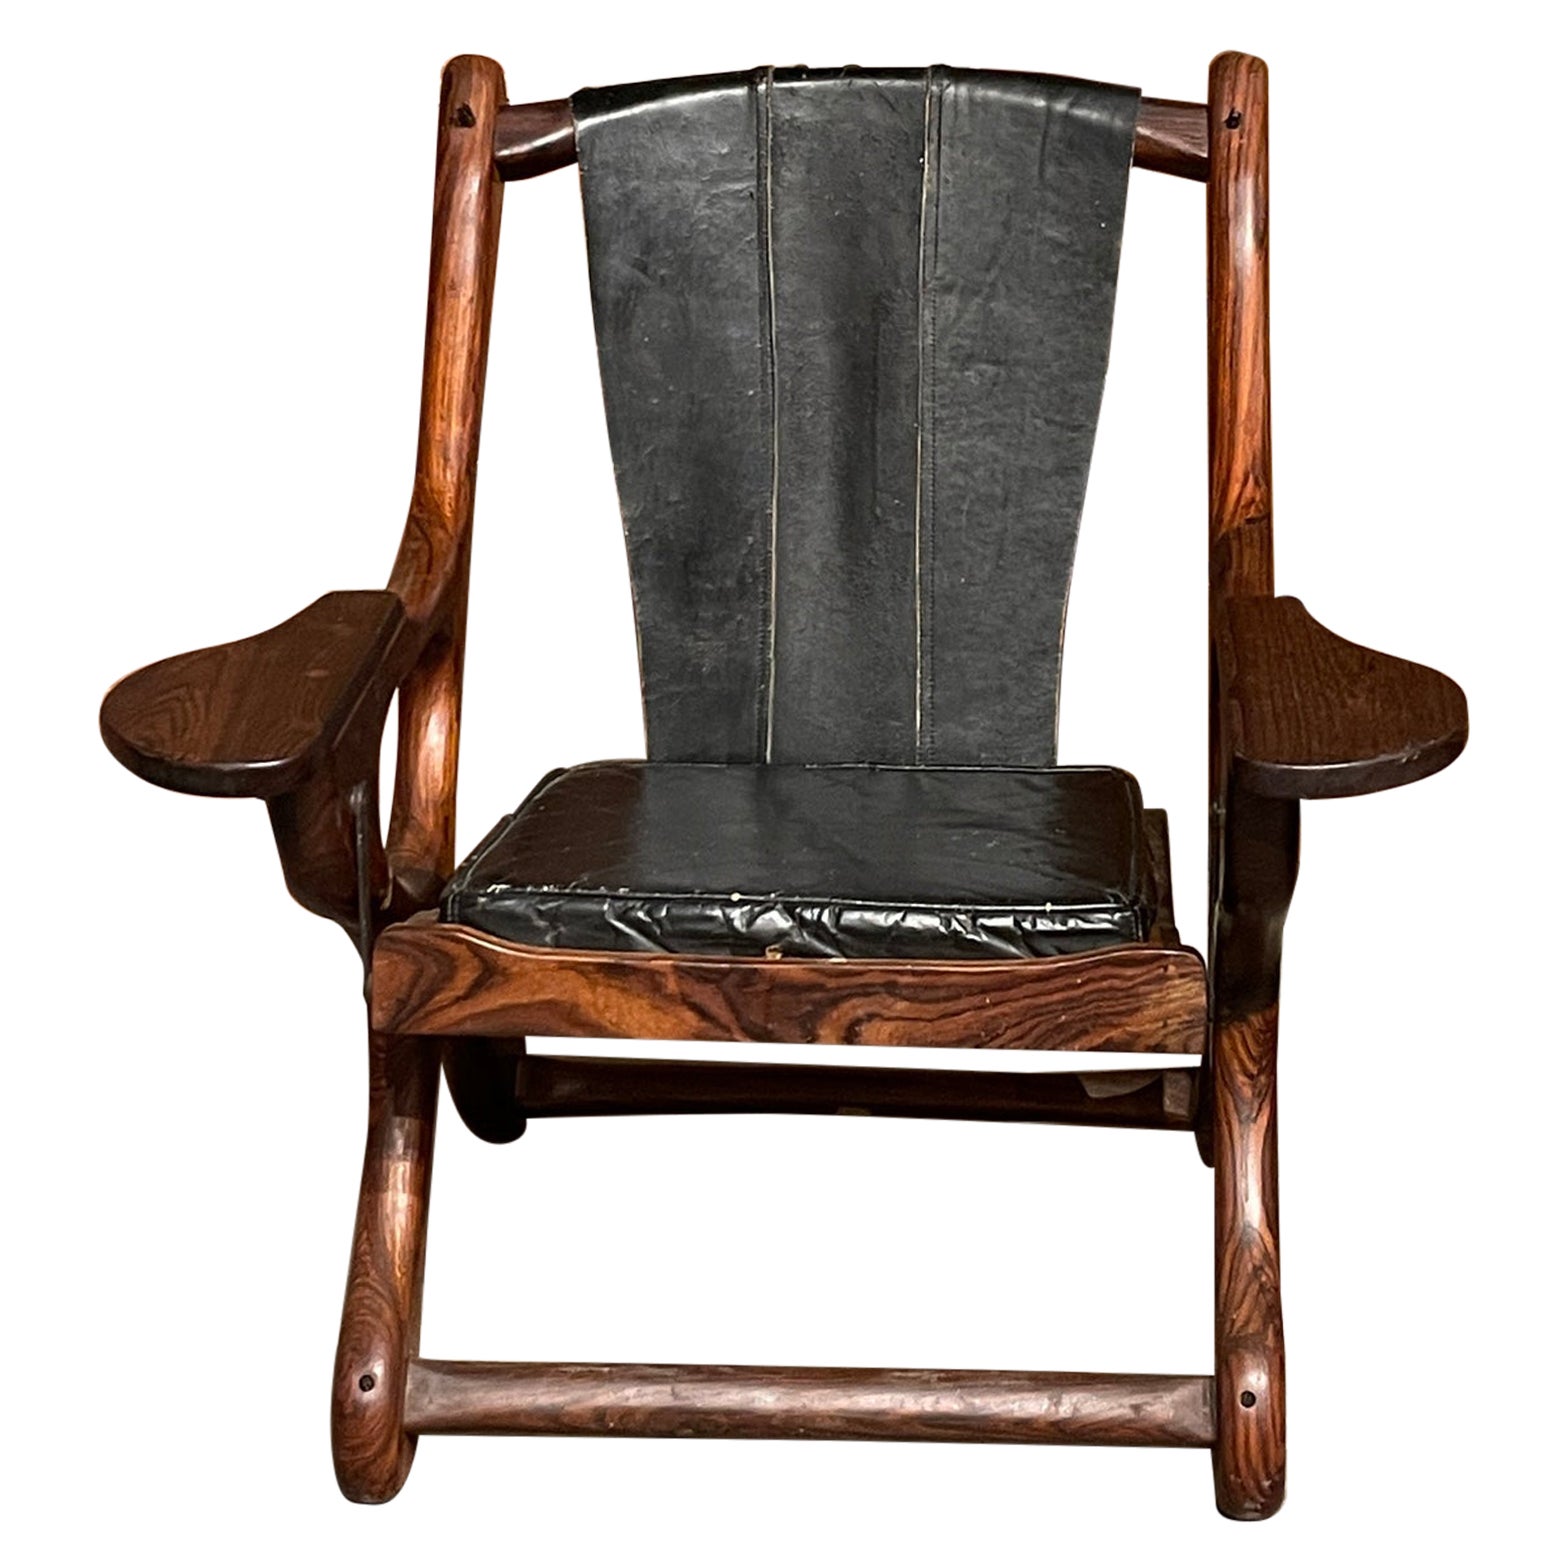 Don Shoemaker for Cocobolo Rosewood and Leather Swing Chair, Circa 1960